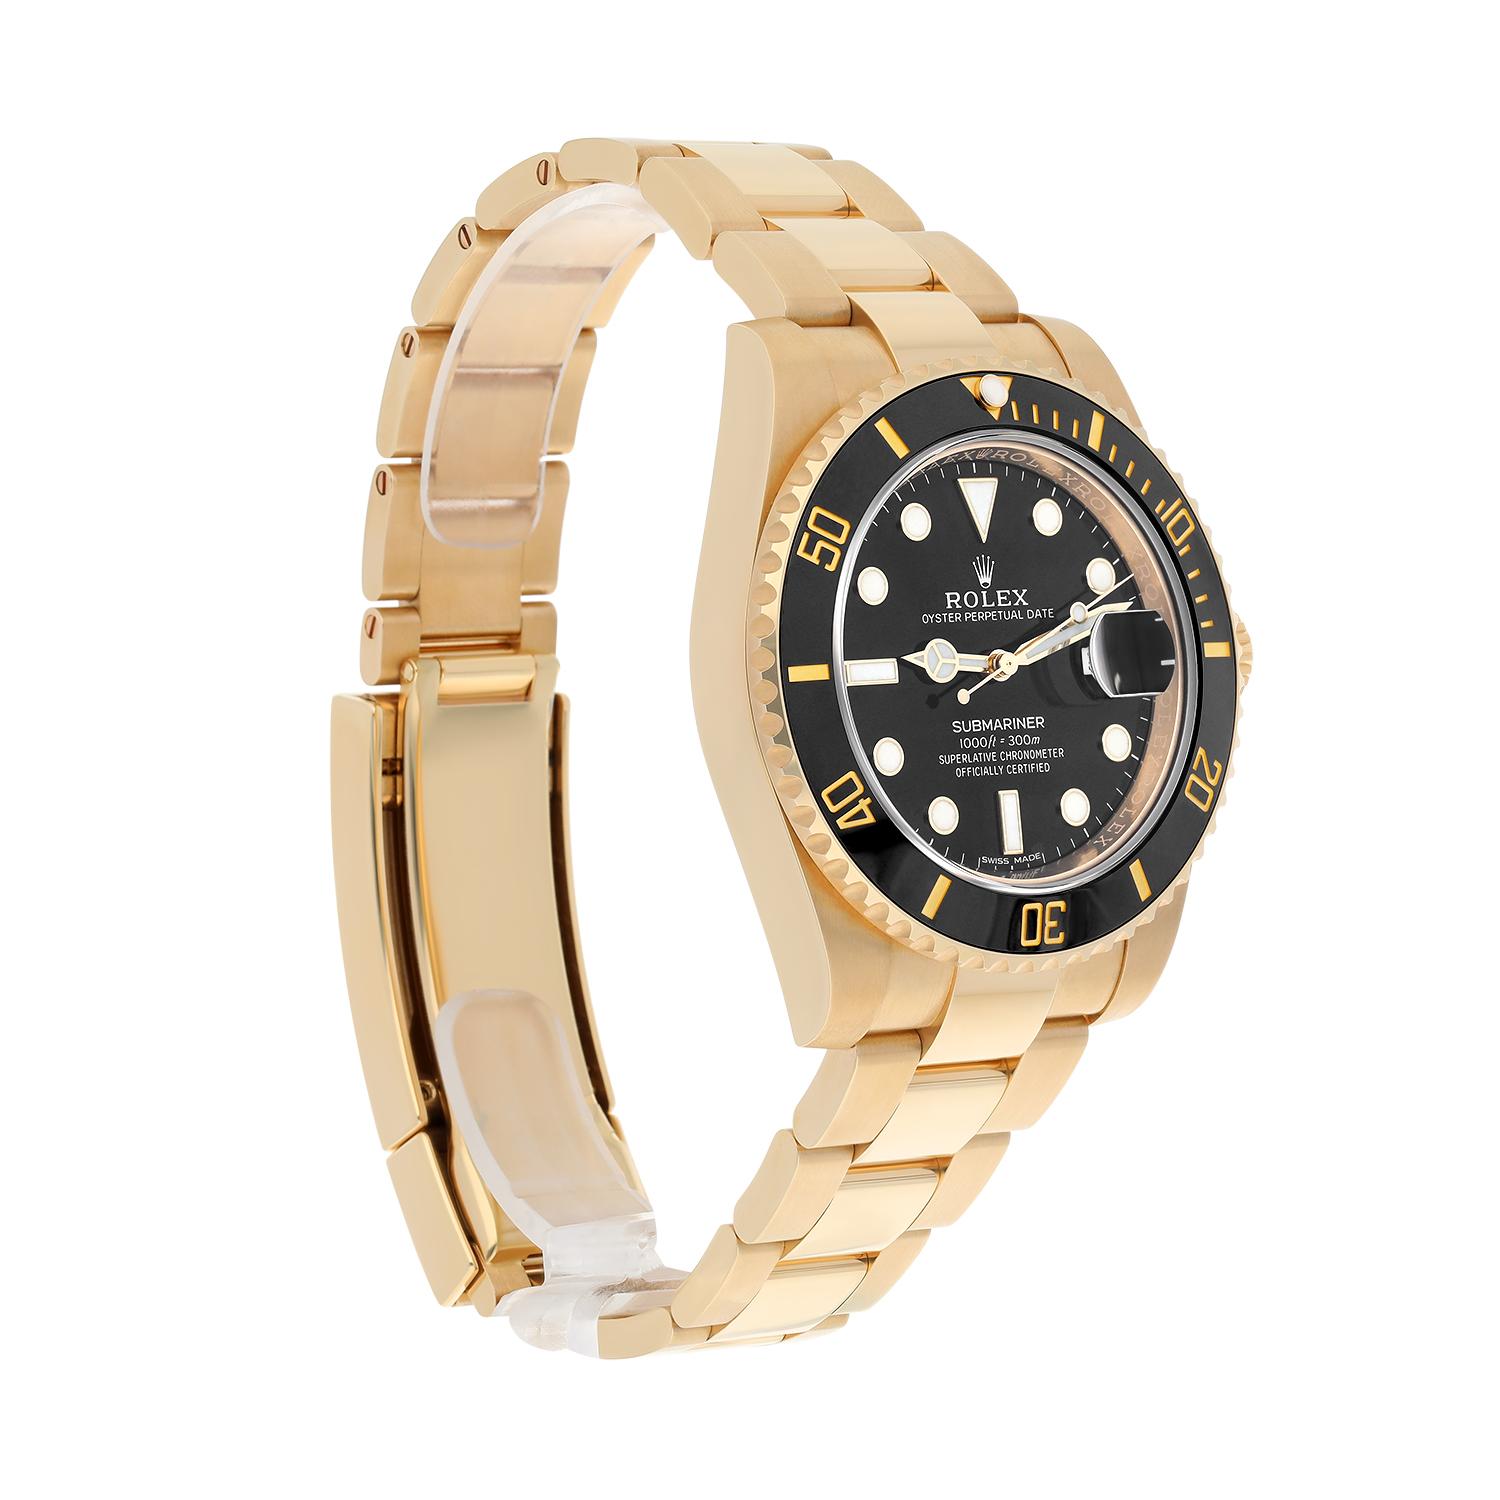 Rolex Submariner Date Ceramic Bezel Yellow Gold Black 116618LN Men's Watch In New Condition For Sale In New York, NY